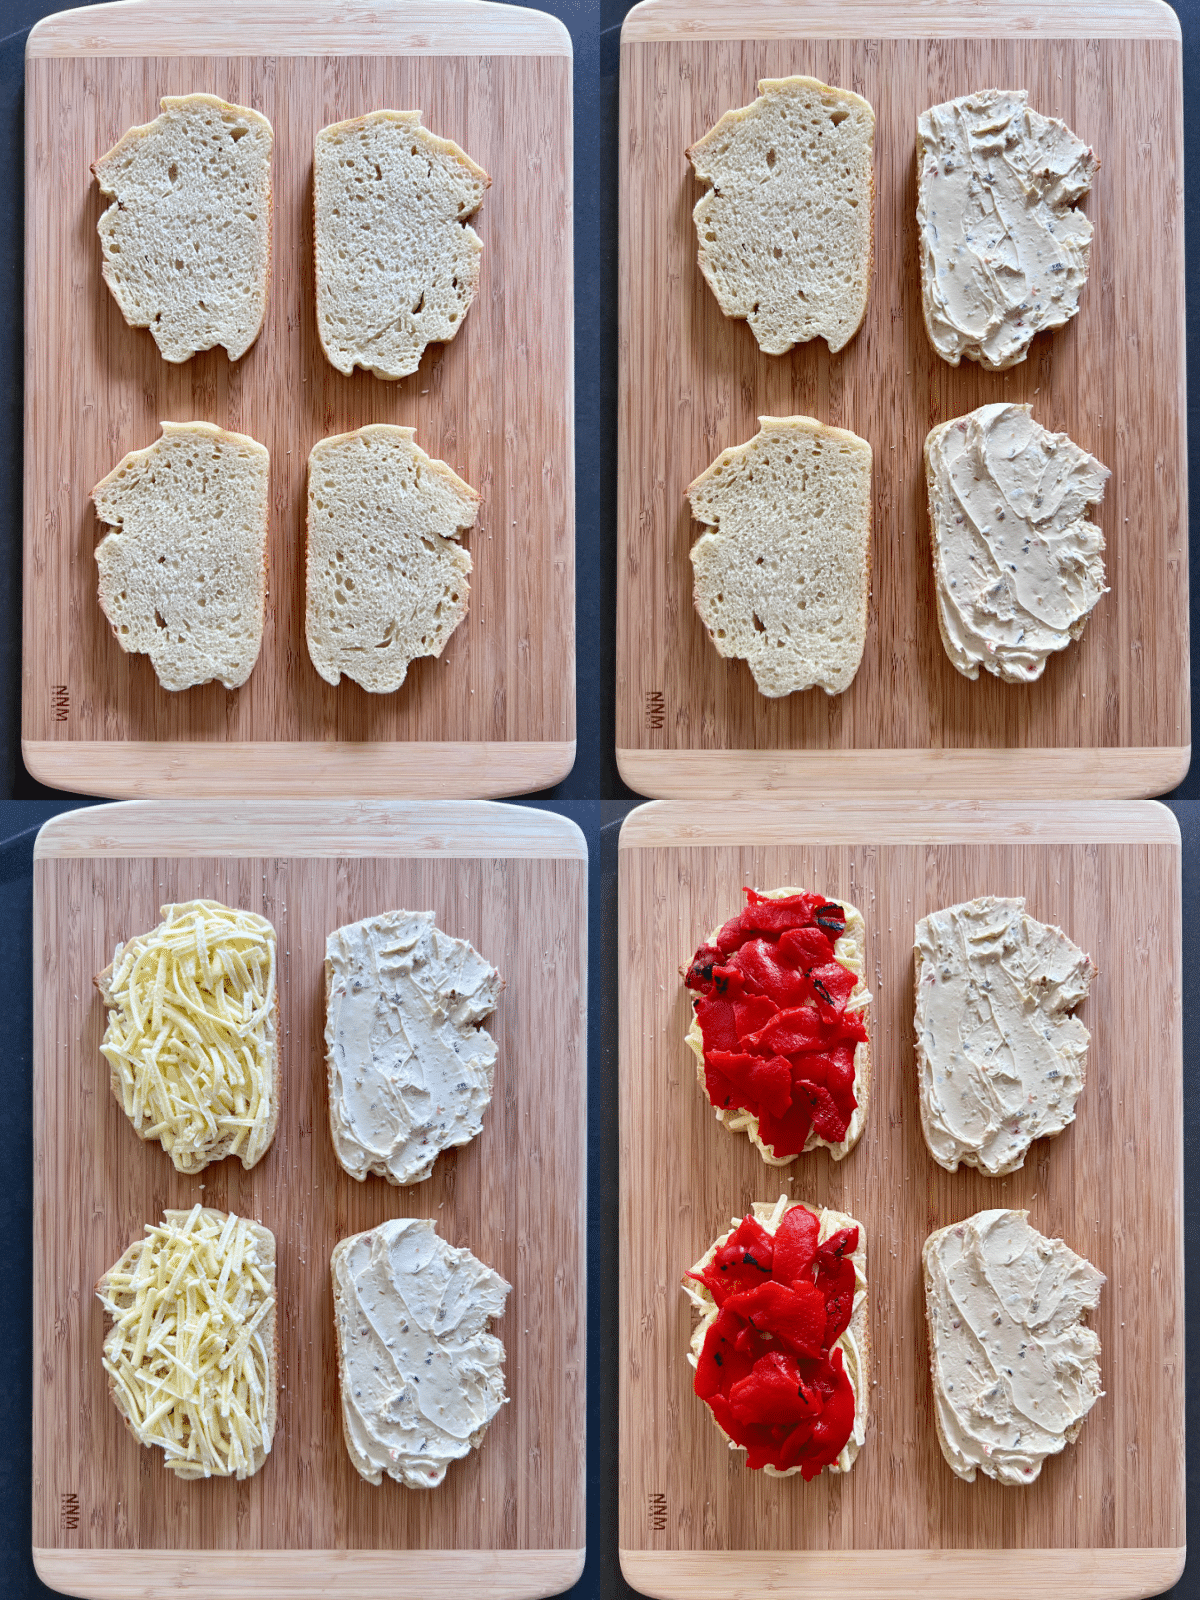 a four photo collage showing how to make roasted red pepper grilled cheese: for two sandwiches, four bread slices on bamboo cutting board / one side spread with dairy free cream cheese / the other side covered with grated dairy free cheese / roasted red peppers on top of that cheese.